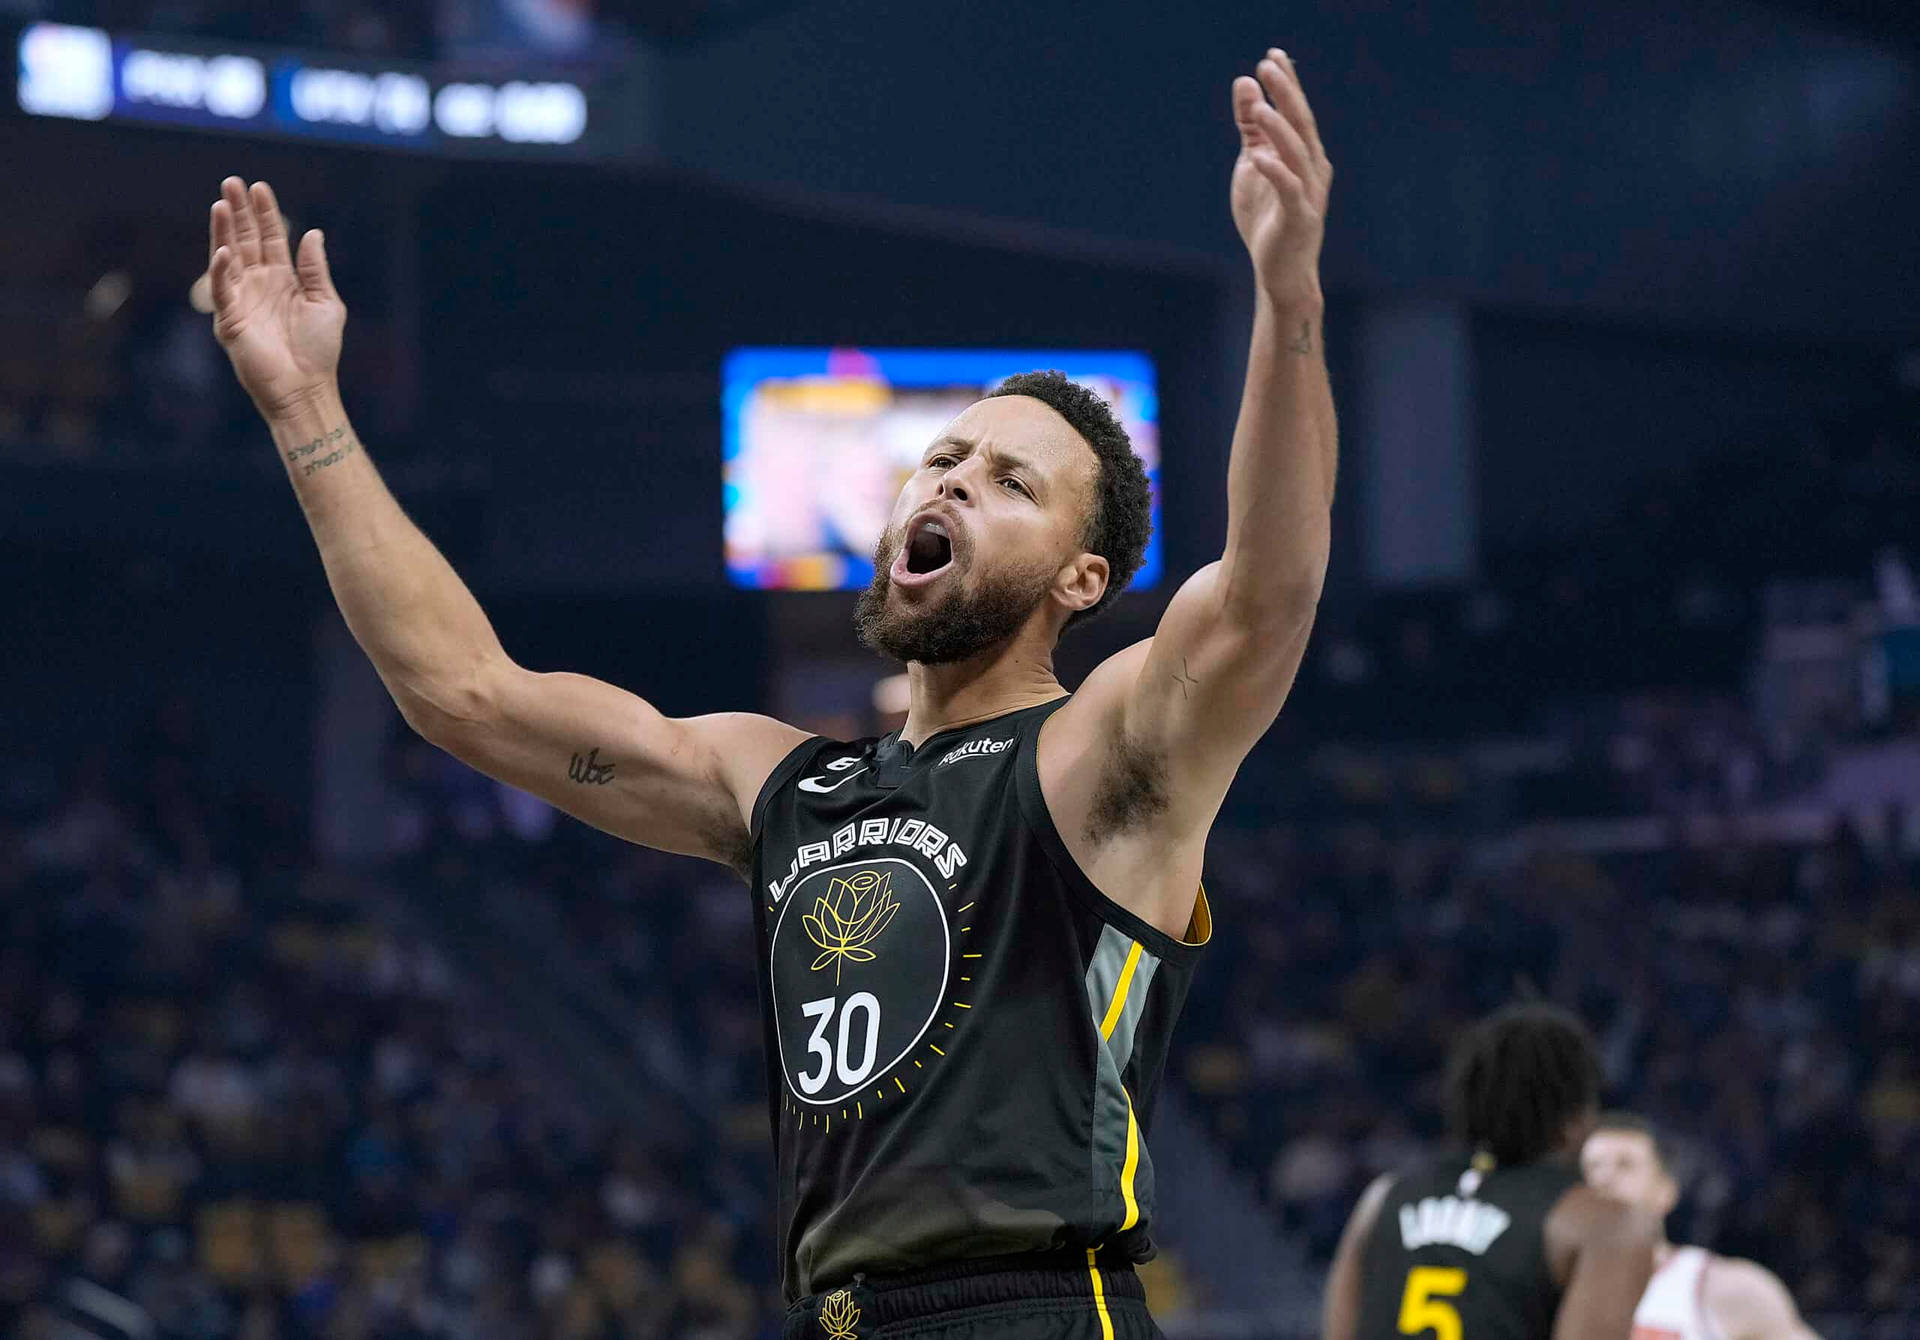 Steph Curry Celebrating With Arms Up Background